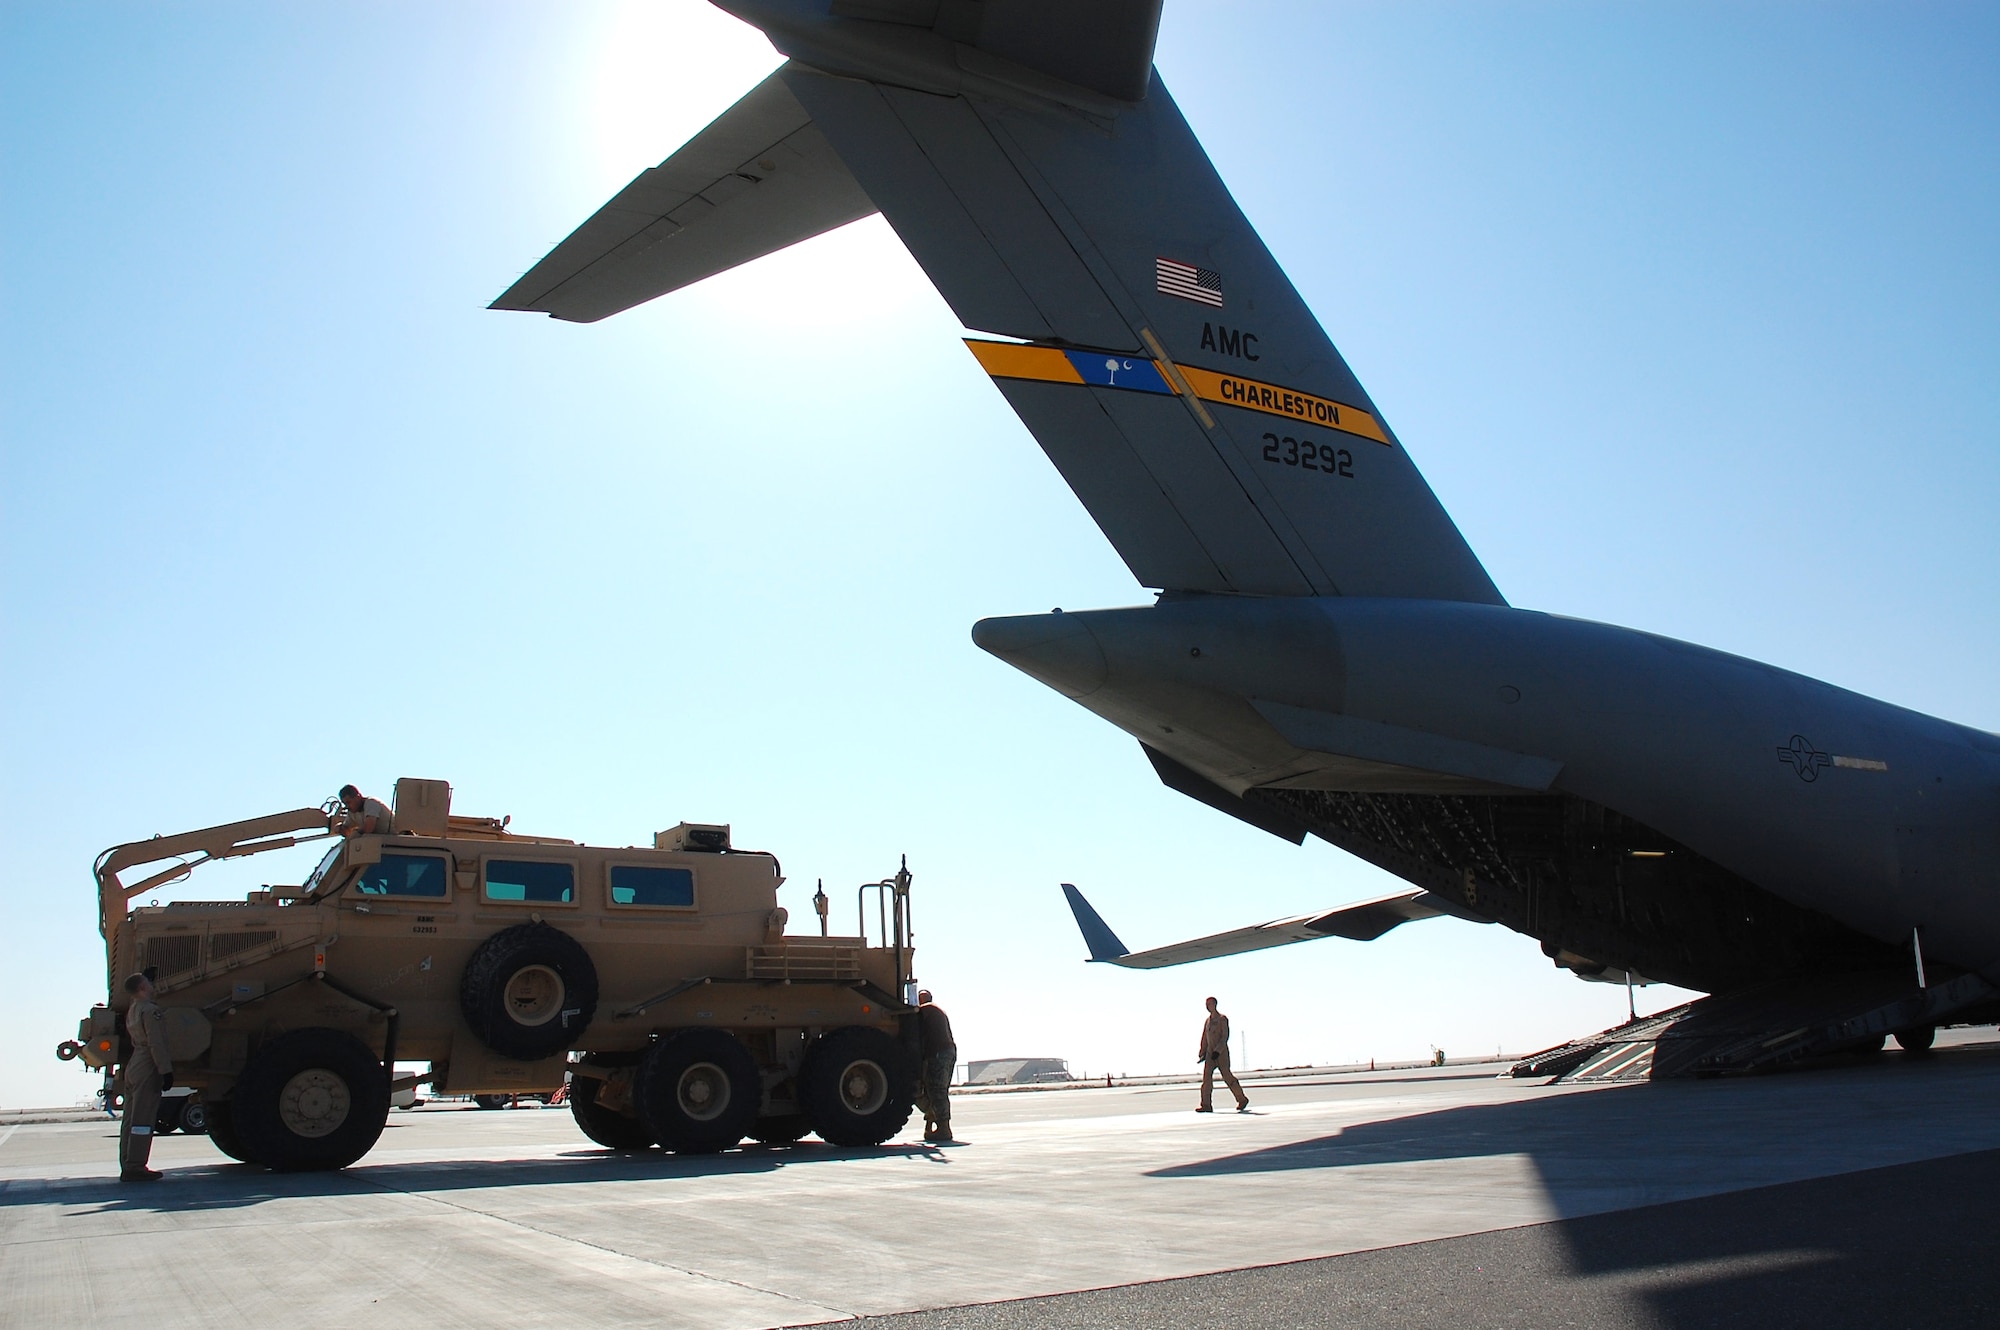 SOUTHWEST ASIA -- Airmen from the 386th and 379th Air Expeditionary Wings load a Mine Resistant Ambush Protected vehicle onto a C-17 Globemaster III from Charleston AFB, S.C., Dec. 28.  The MRAP was heading to Iraq and is designed to help protect military members from mines and improvised explosive devices.  The C-17's aircrew members are from McGuire AFB, N.J. and currently deployed to an air base in the Middle East.  (U.S. Air Force photo/Staff Sgt. Tia Schroeder)